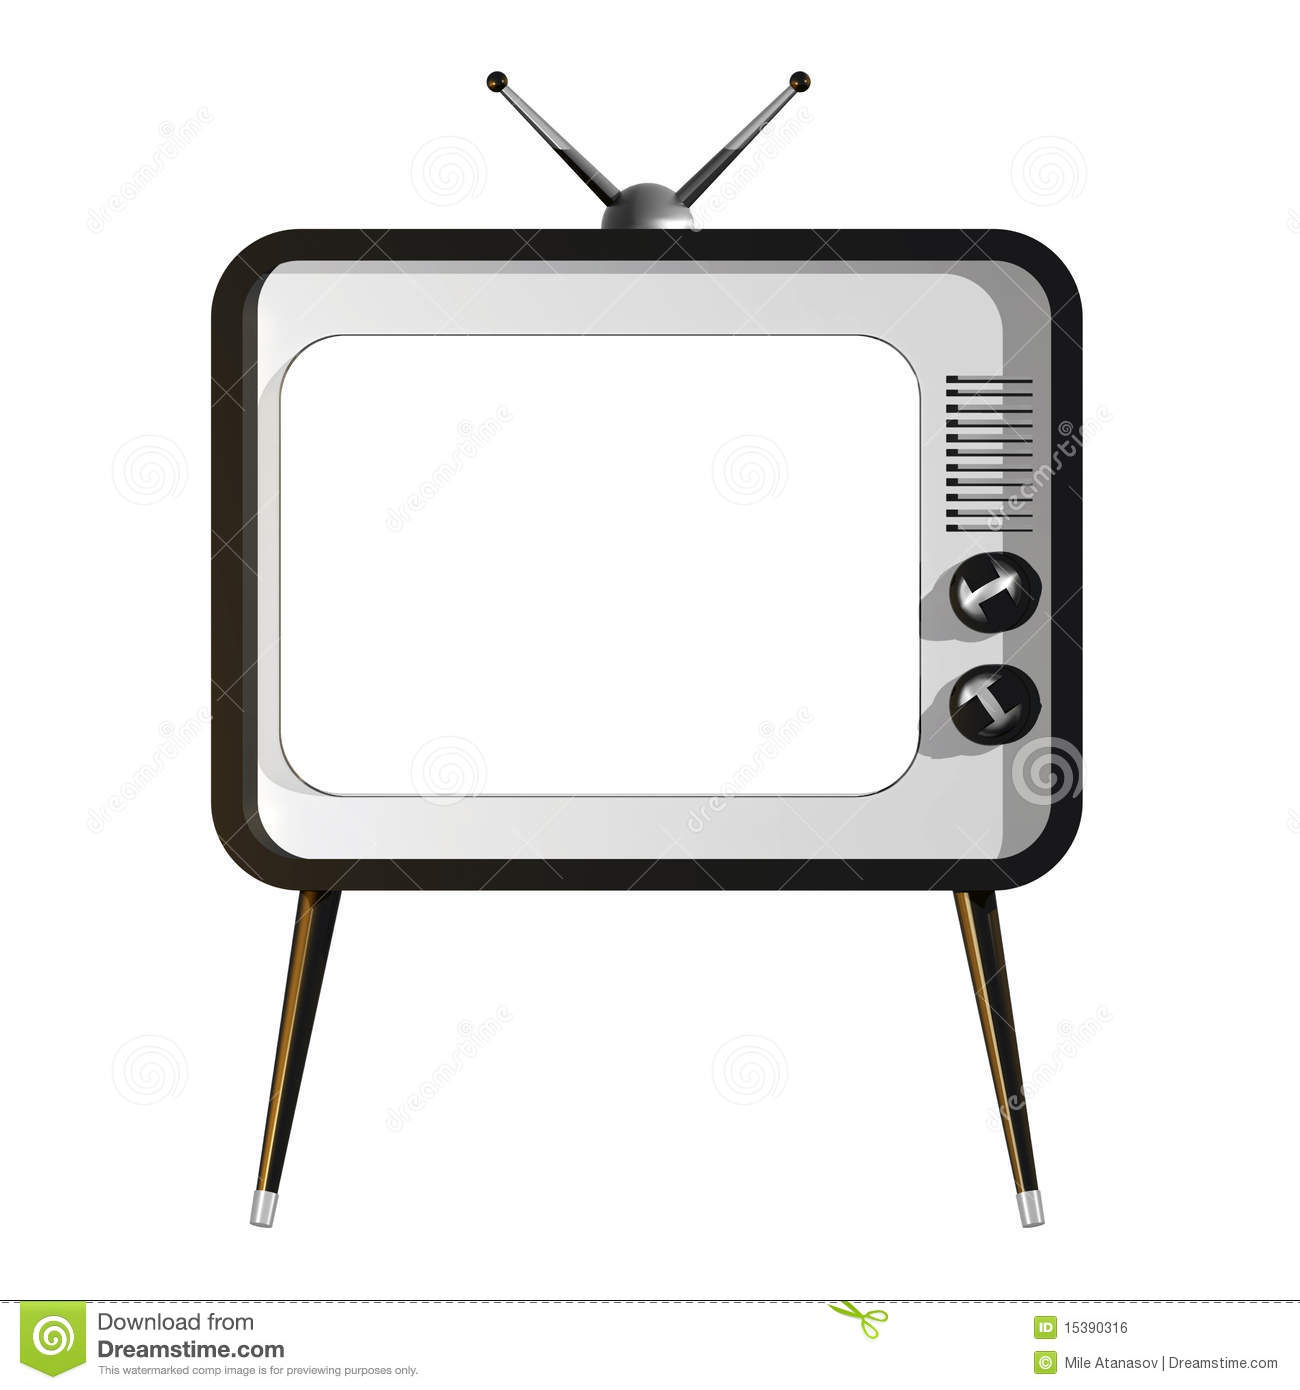 Tv With Empty Screen Royalty Free Stock Image   Image  15390316